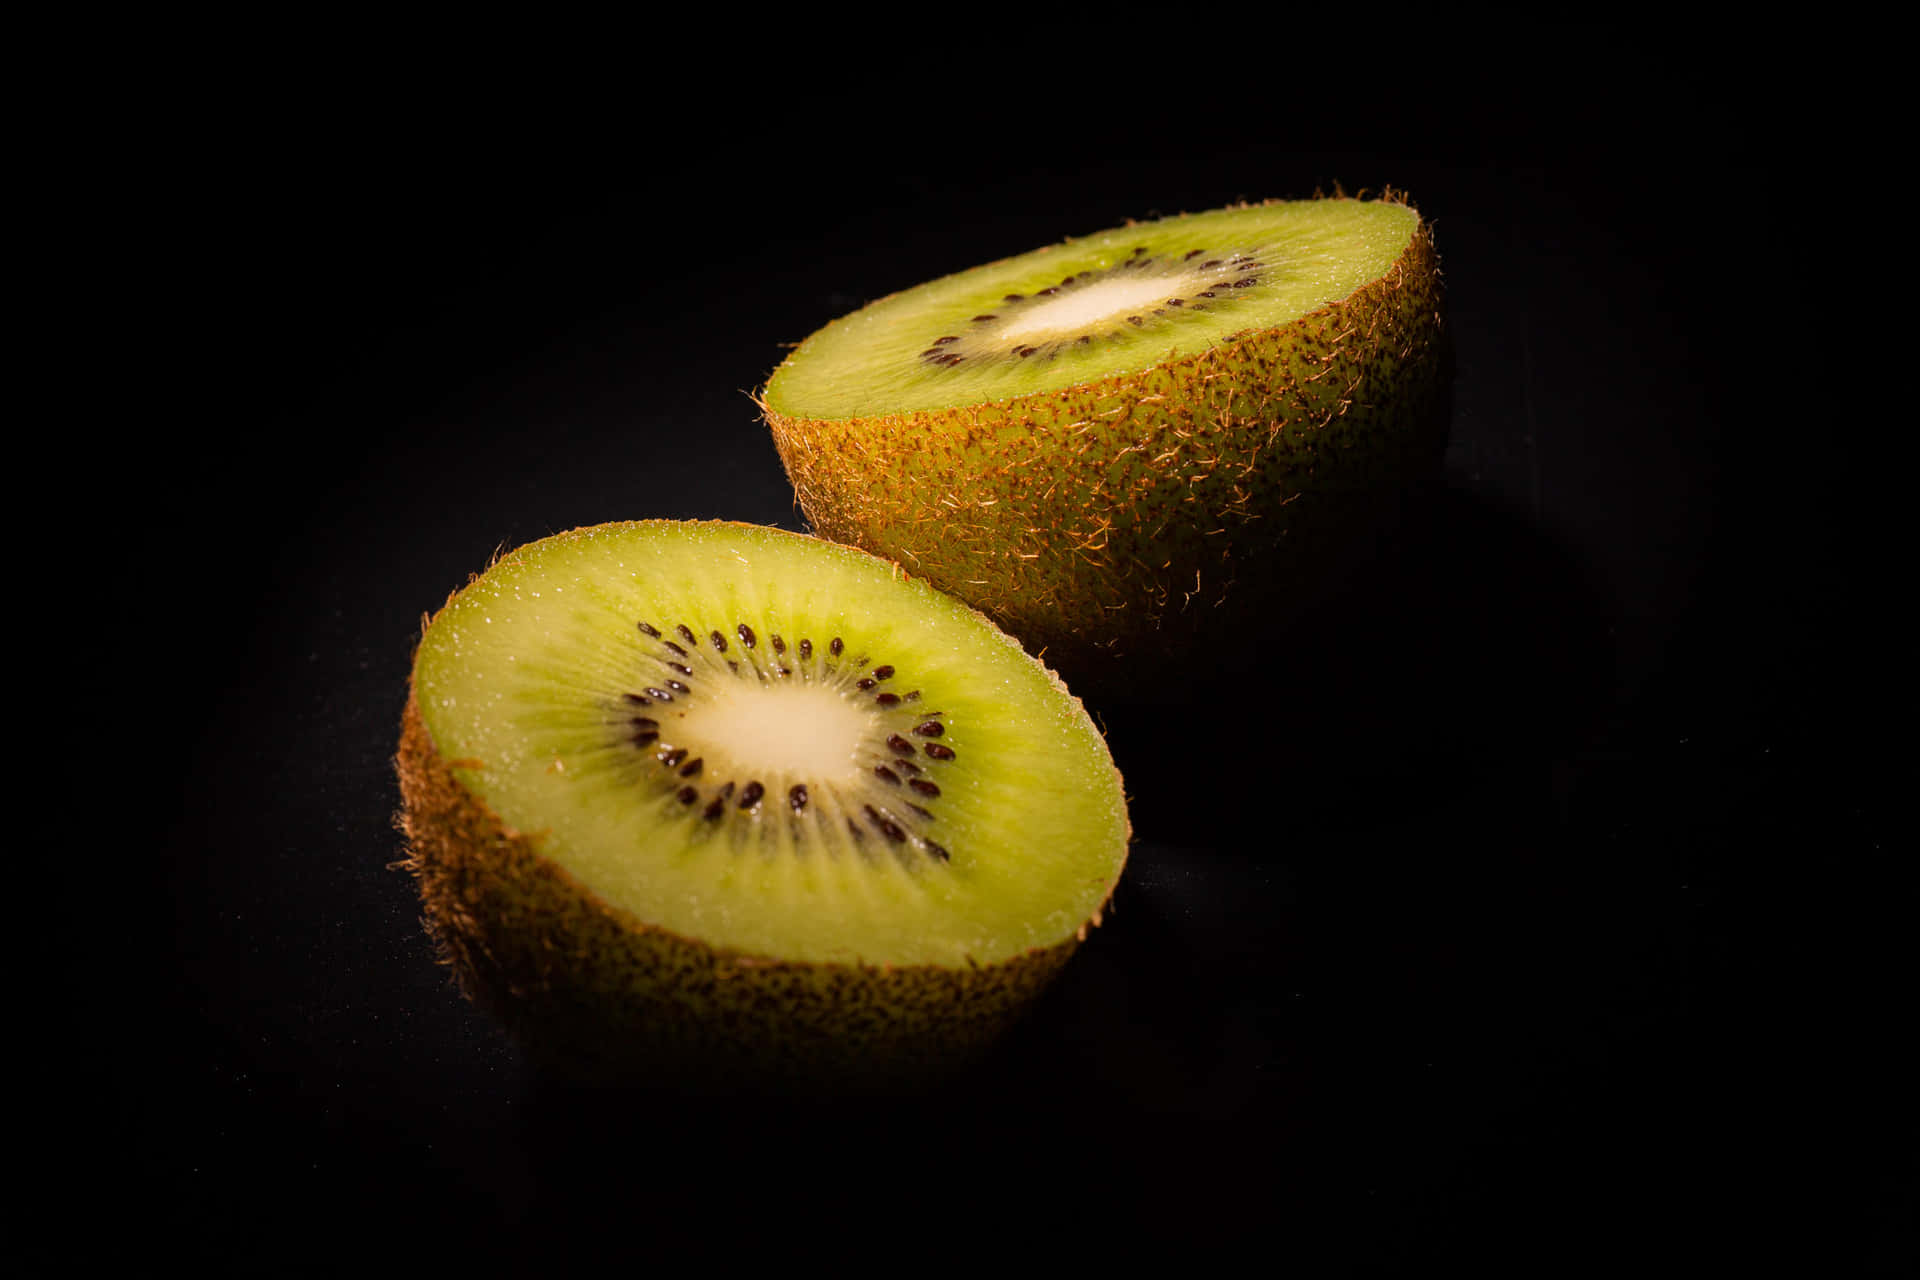 A close-up of a vibrant green kiwi fruit sliced in half